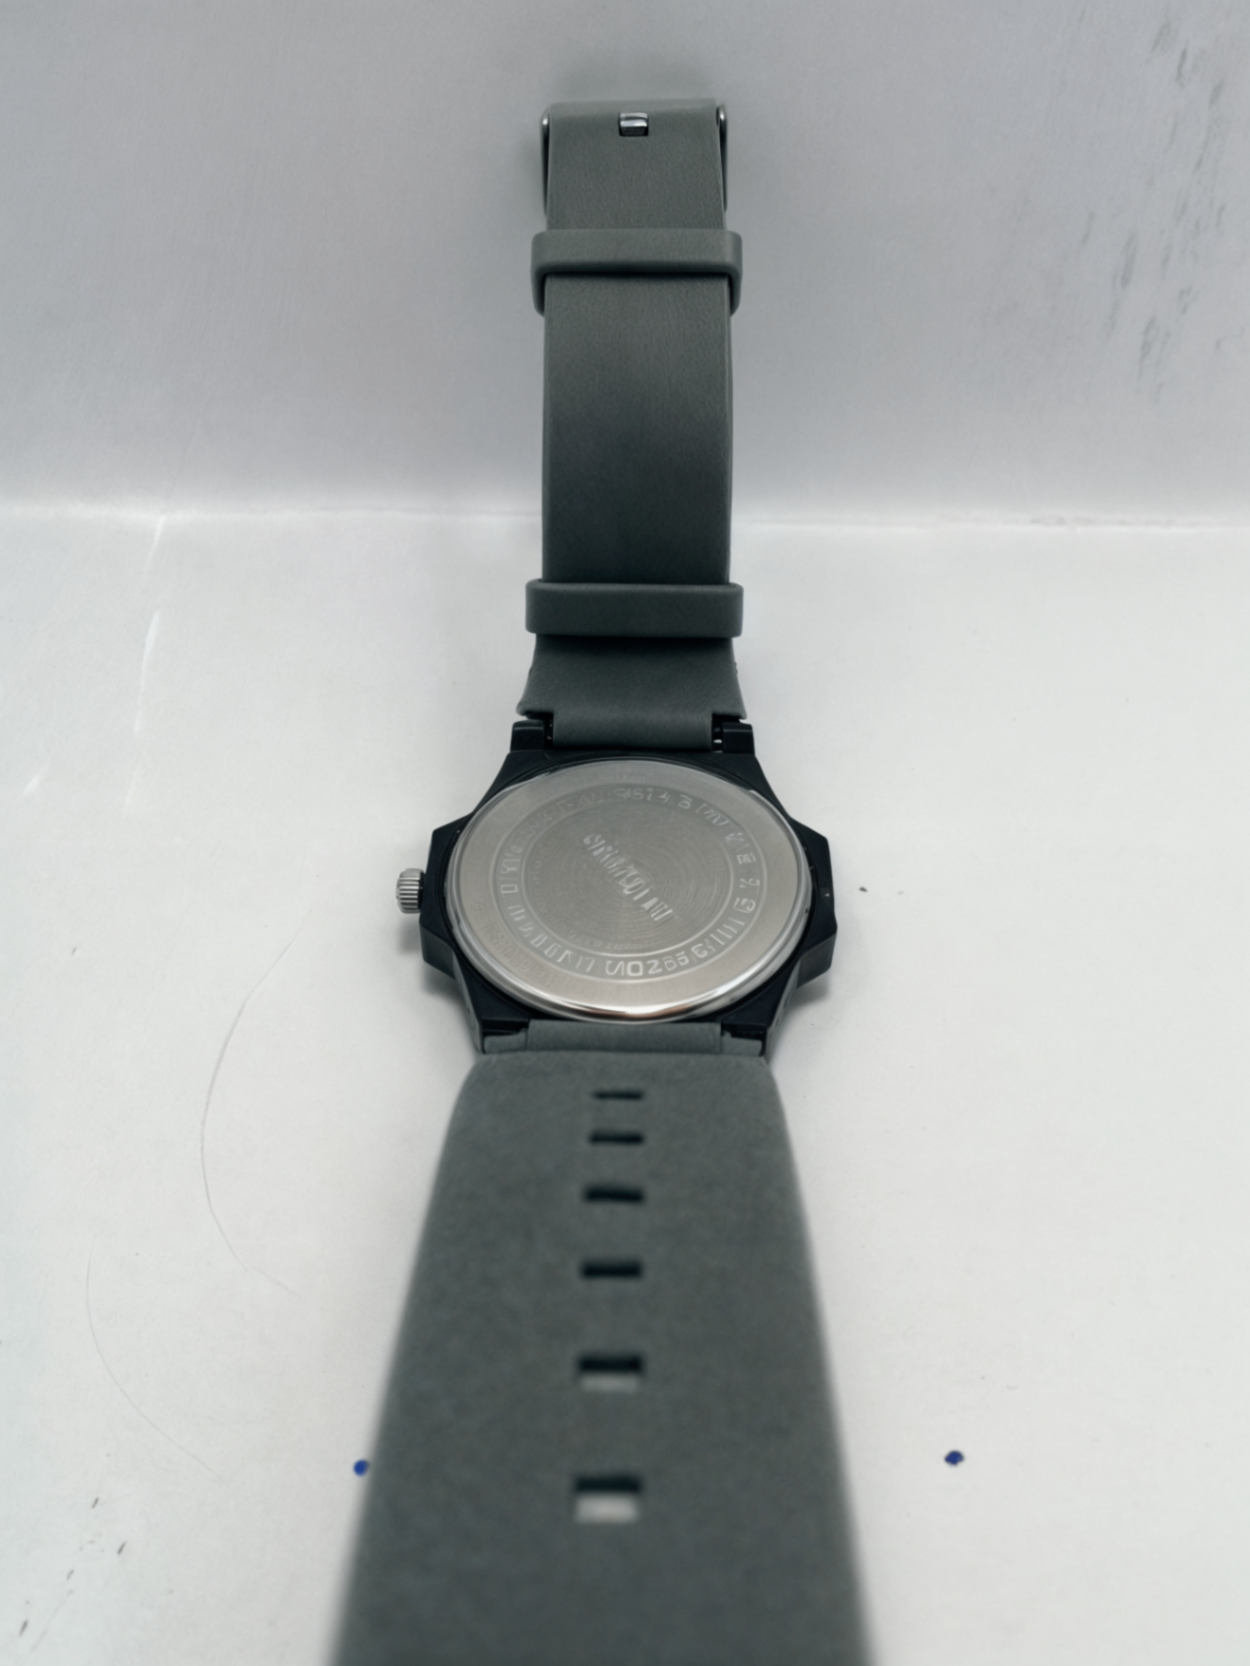 watch with silicon strap on white surface face down